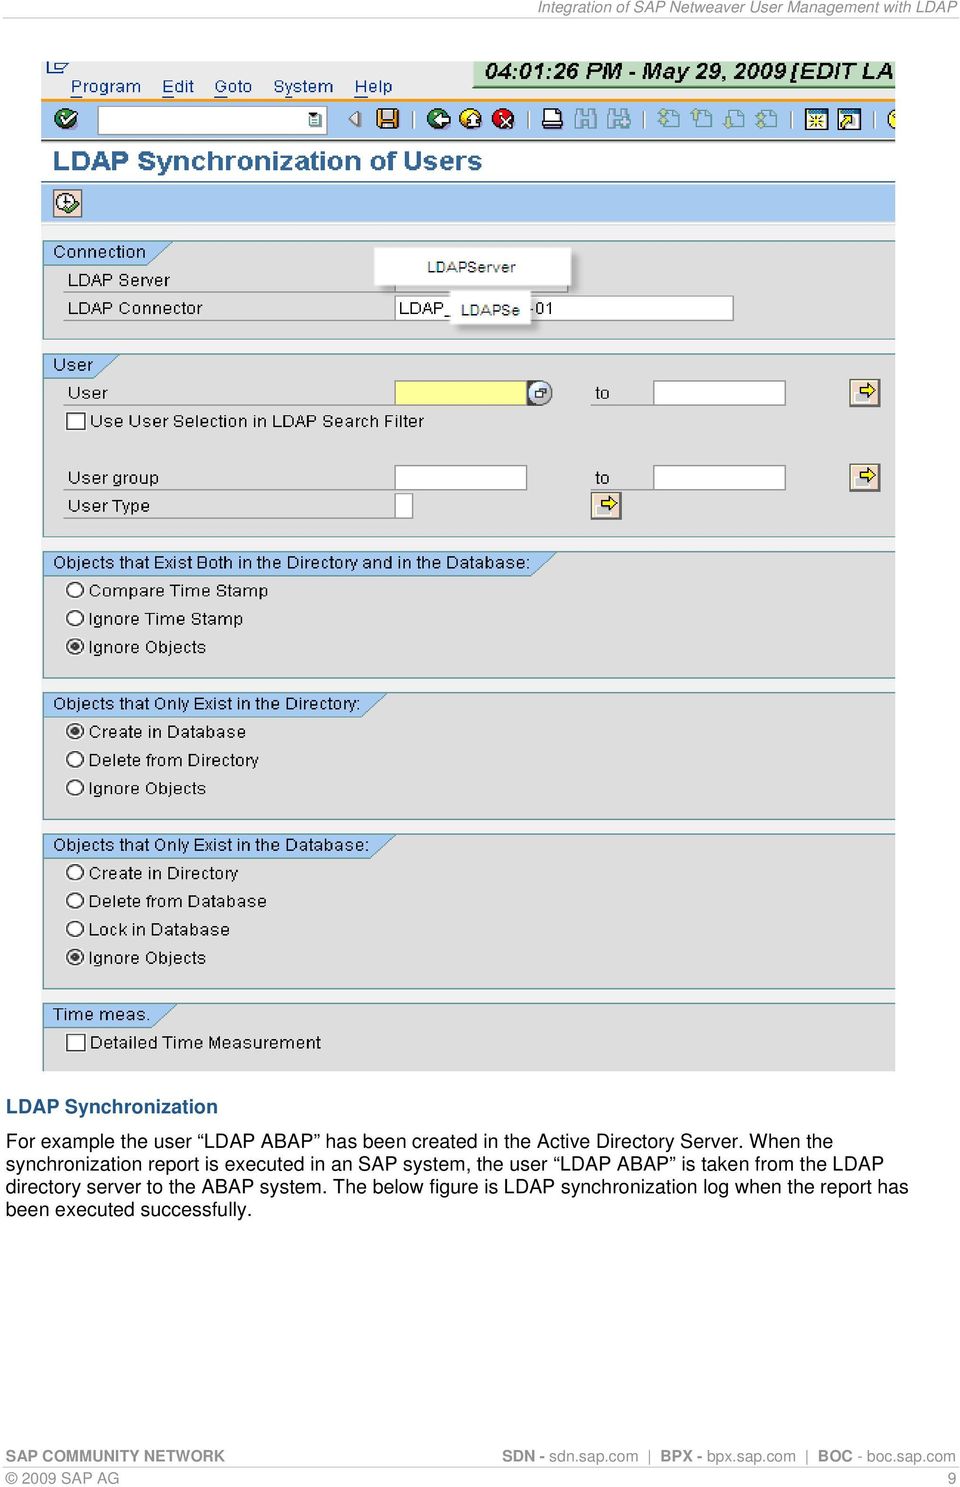 When the synchronization report is executed in an SAP system, the user LDAP ABAP is